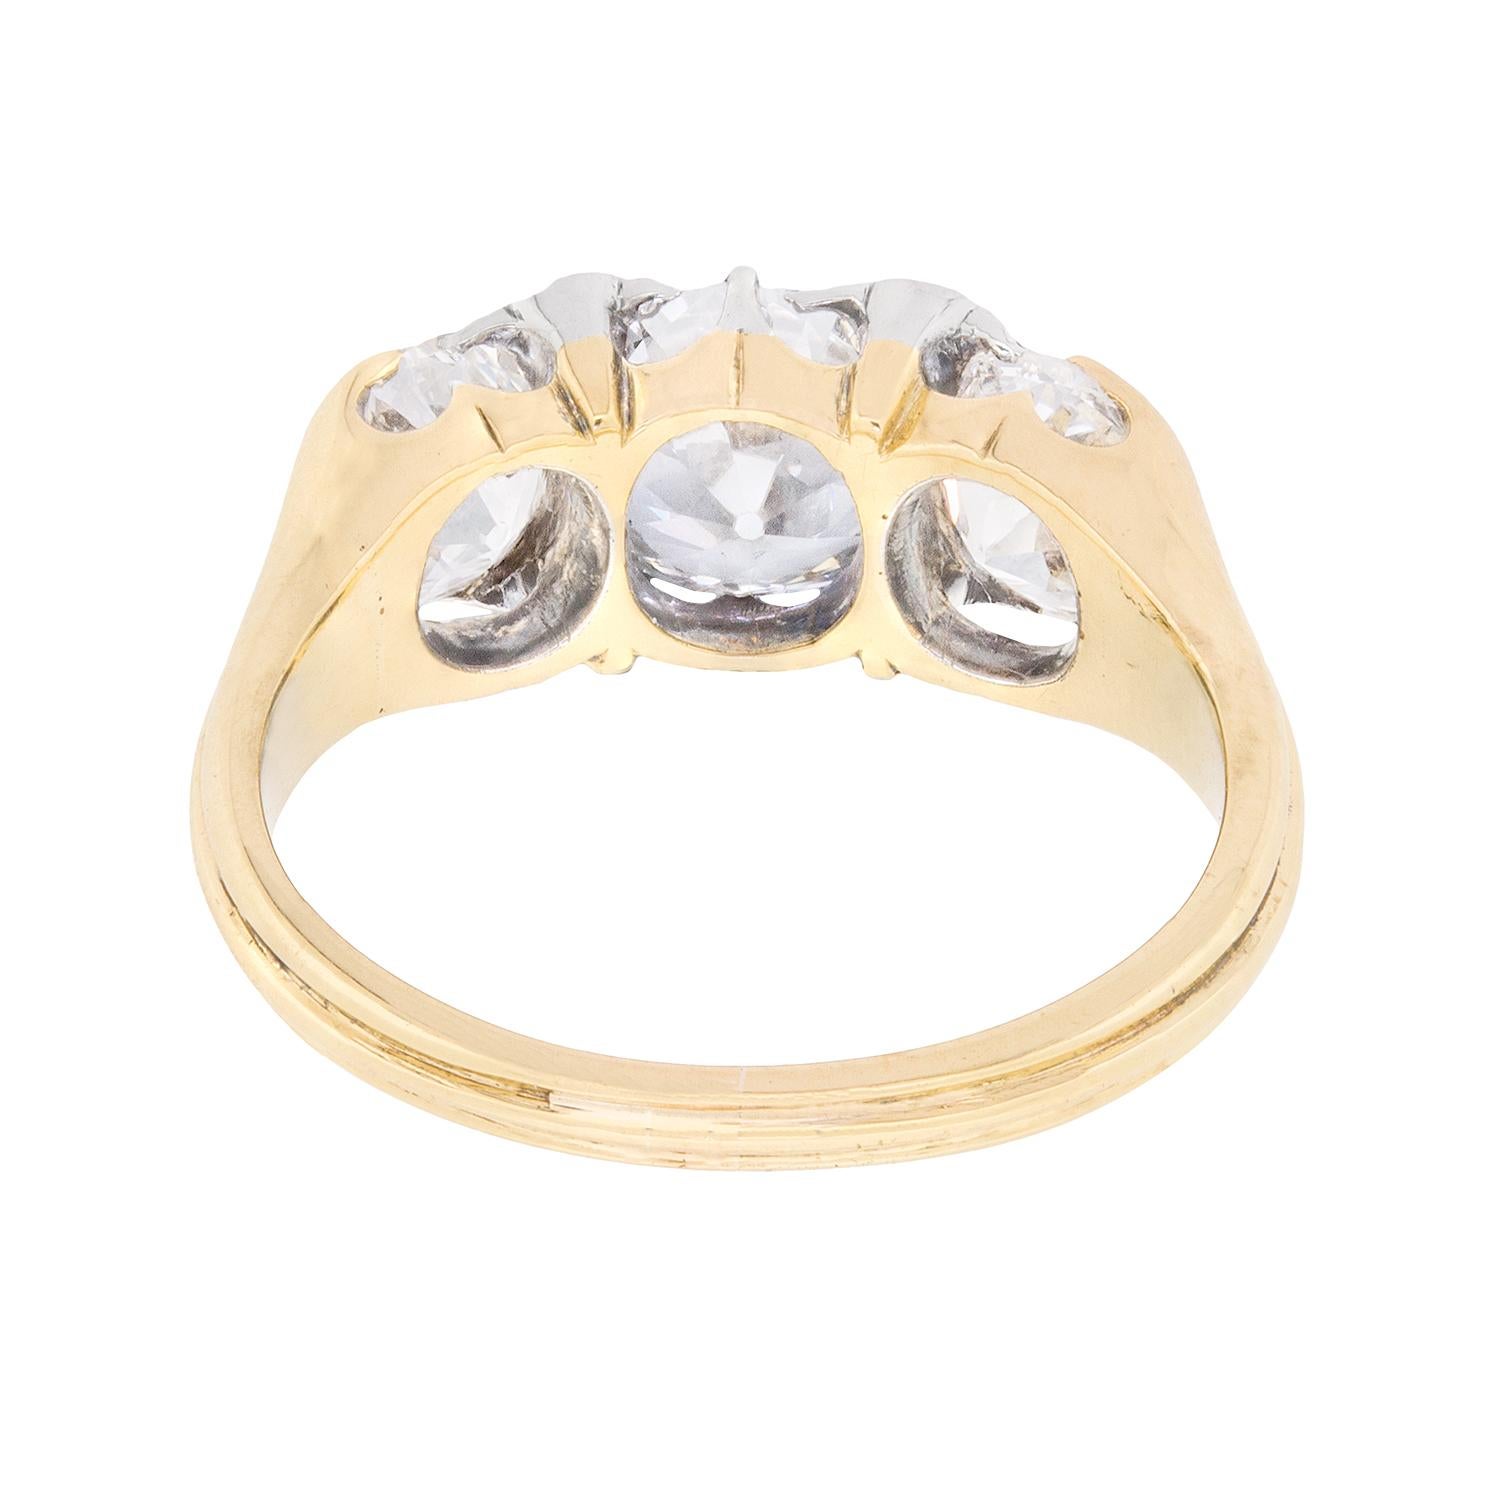 This breath taking three stone diamond ring is a beautifully hand made ring dating back to the 1900s. Classically Victorian in style, it features a centre stone weighing 1.40 carat and flanking either side are two stunning 0.85 carat old cuts. The